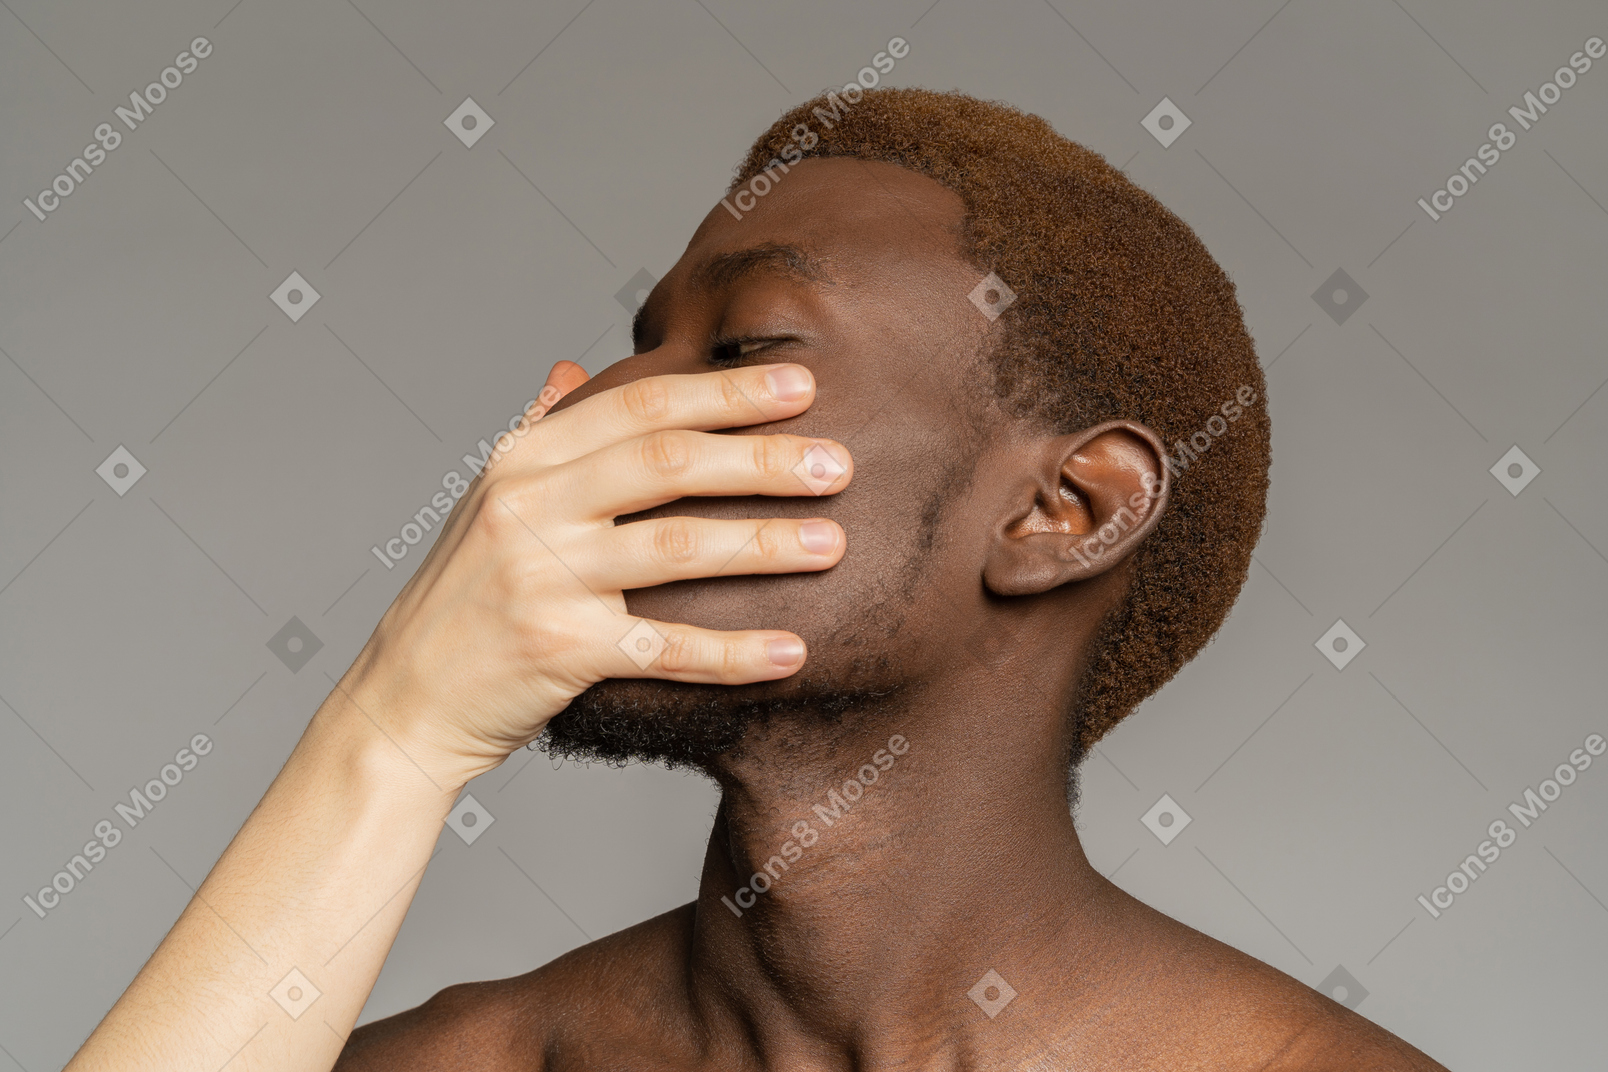 White hand touching the face of black young man